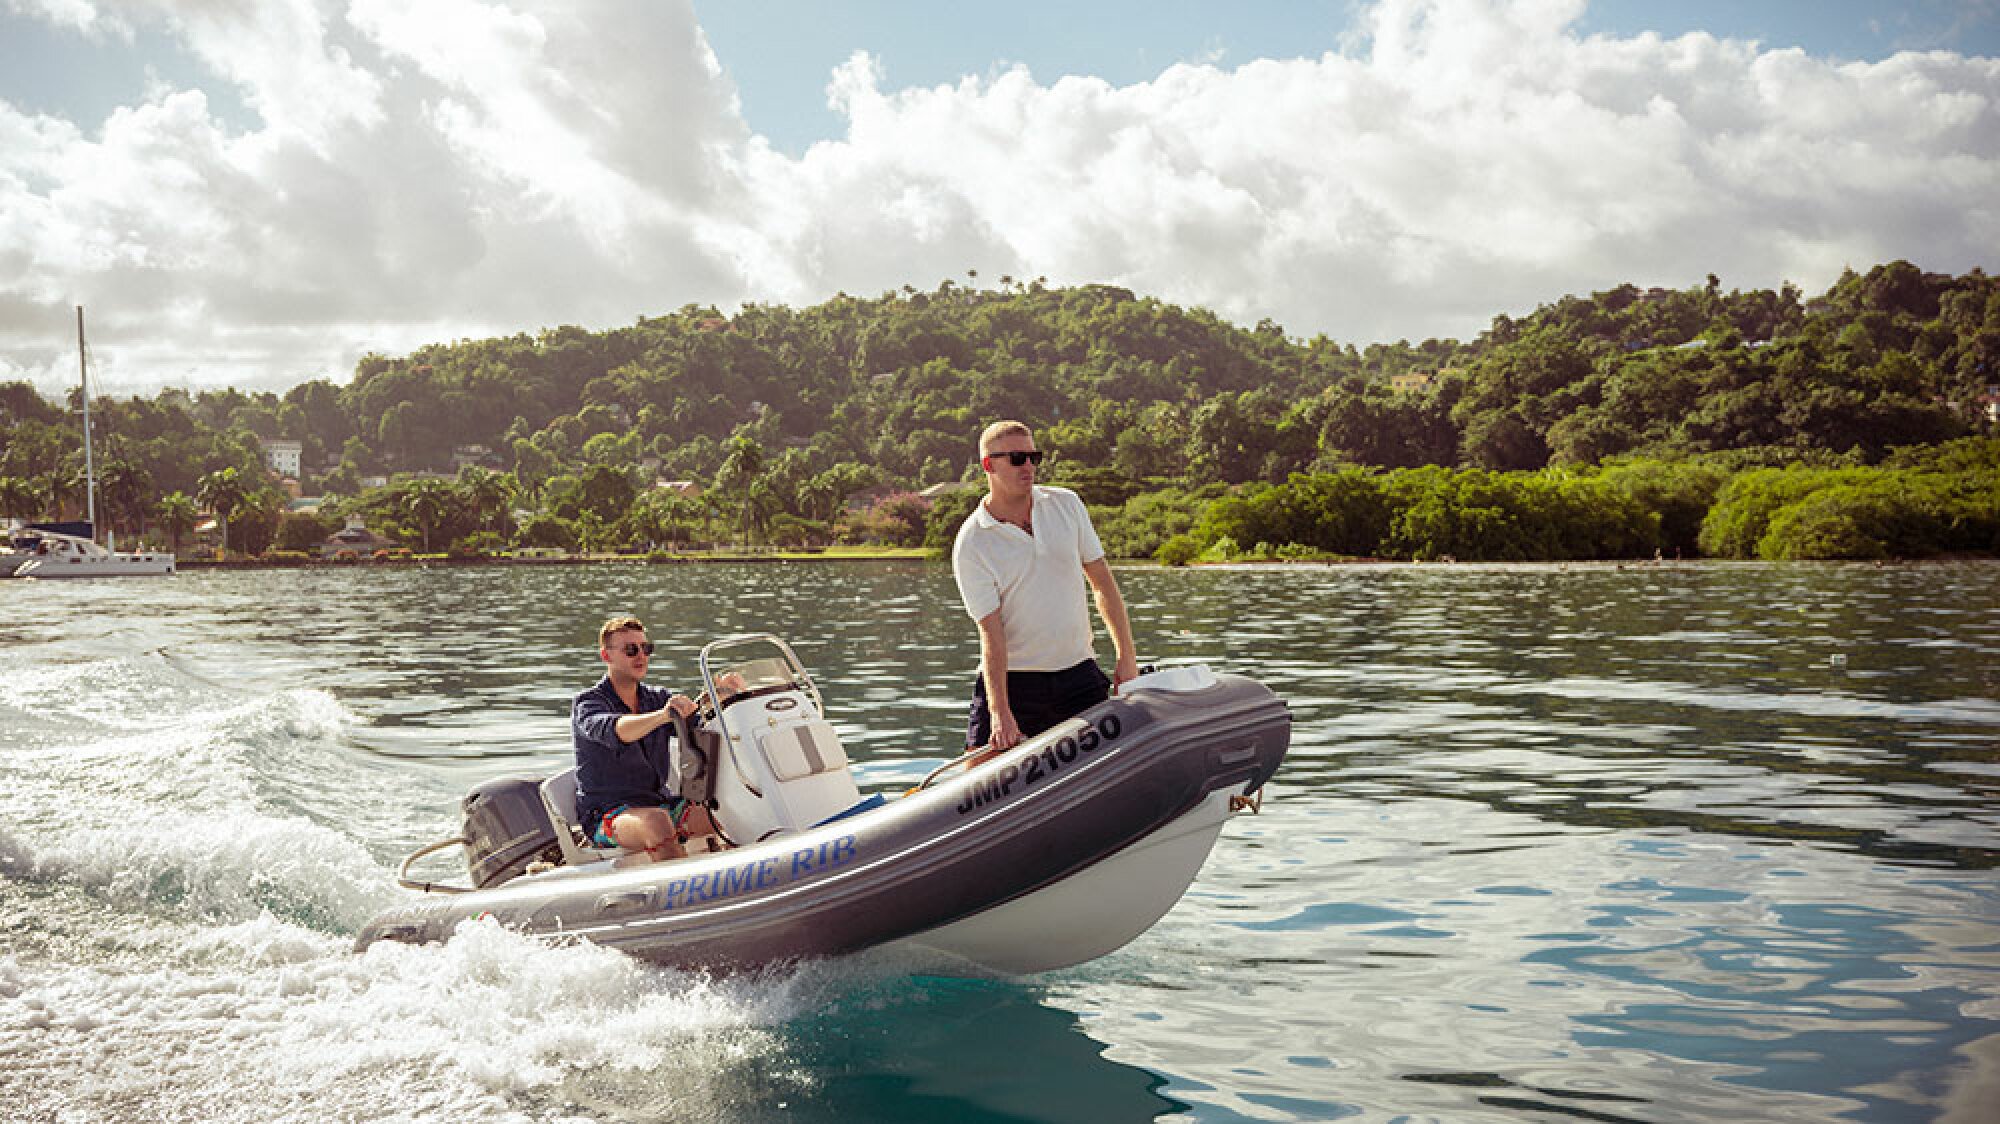 Two men in sunglasses stand on a motorboat in a sunny location.